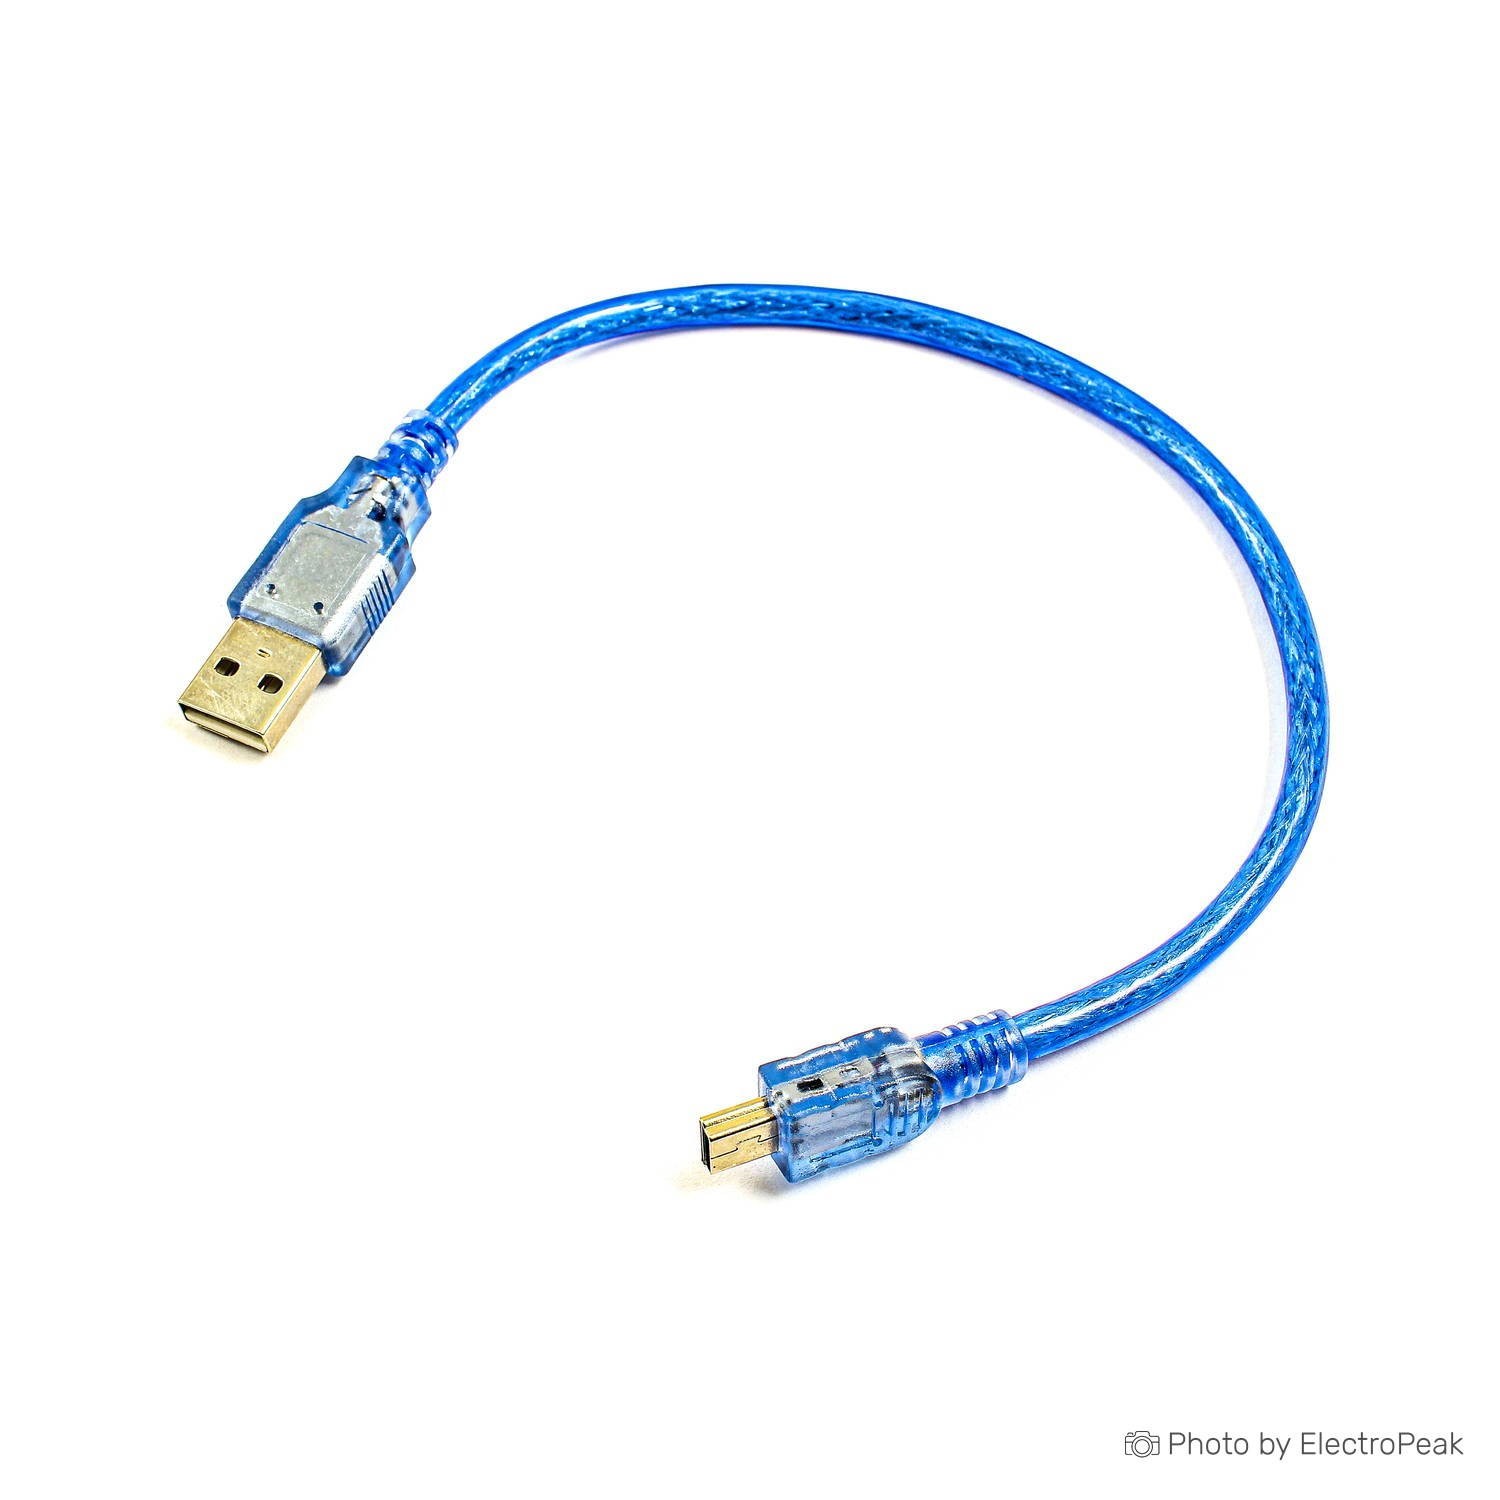 Buy Cable for Arduino Nano (USB 2.0 A to USB 2.0 Mini B) 30cm Online at